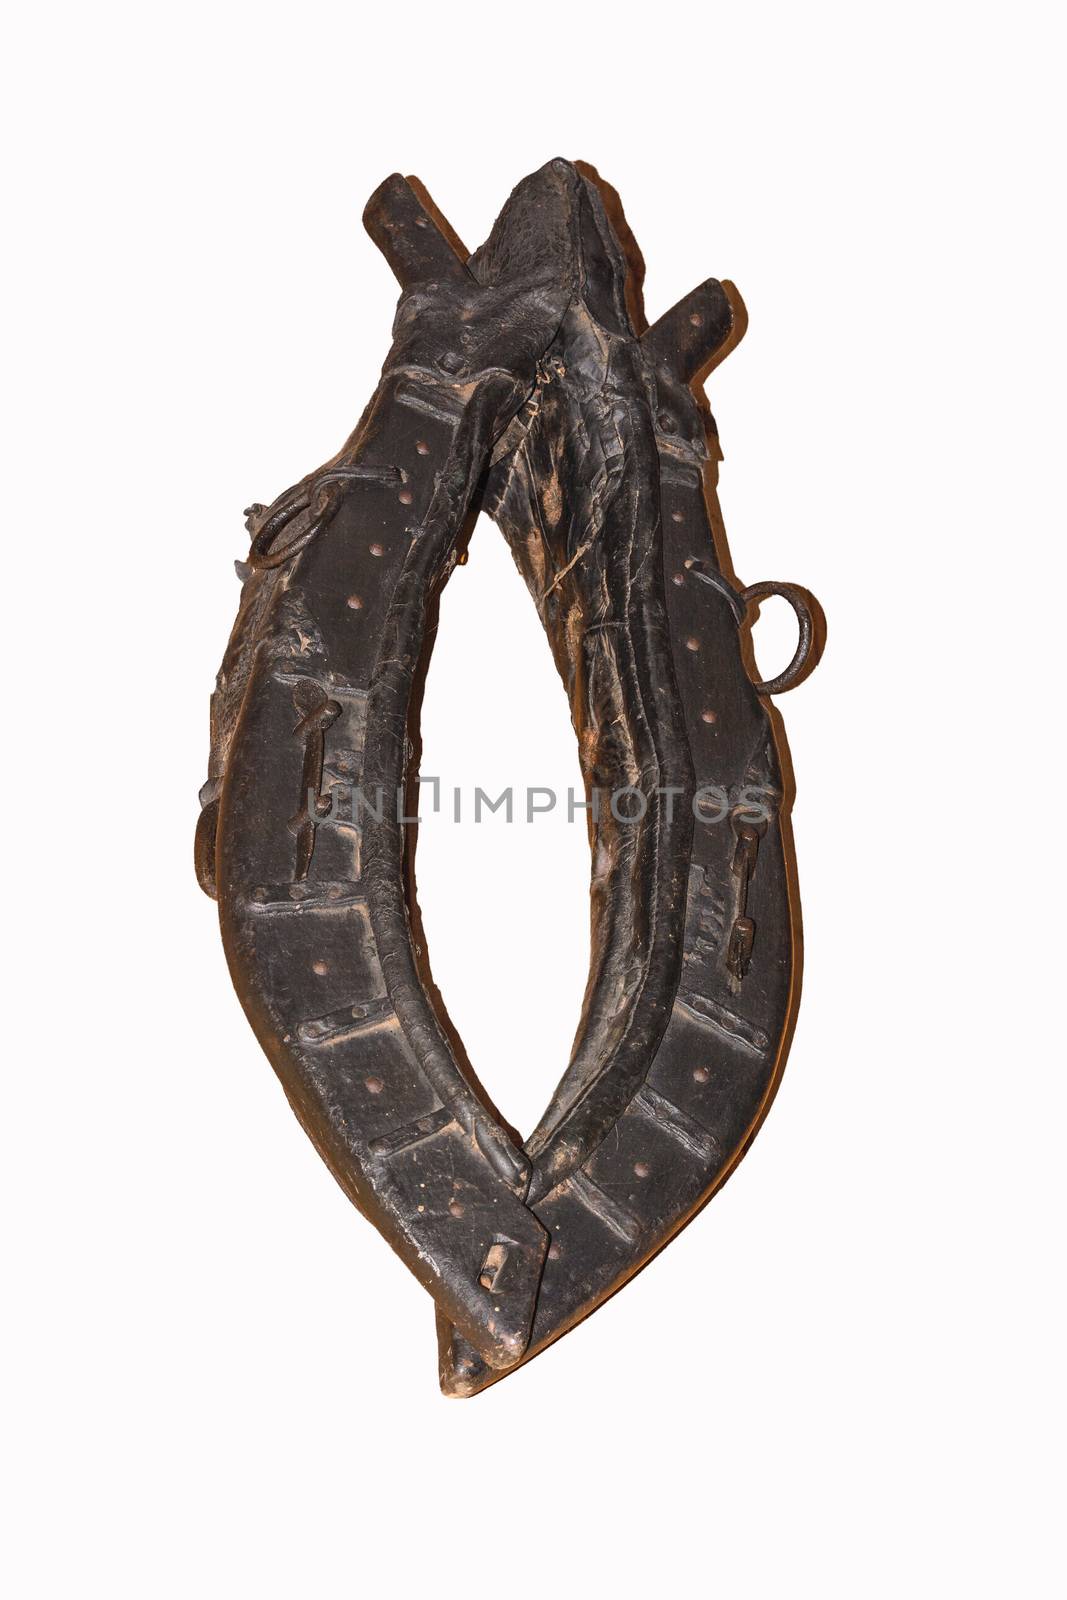 Horse collar hanging on a wooden wall.